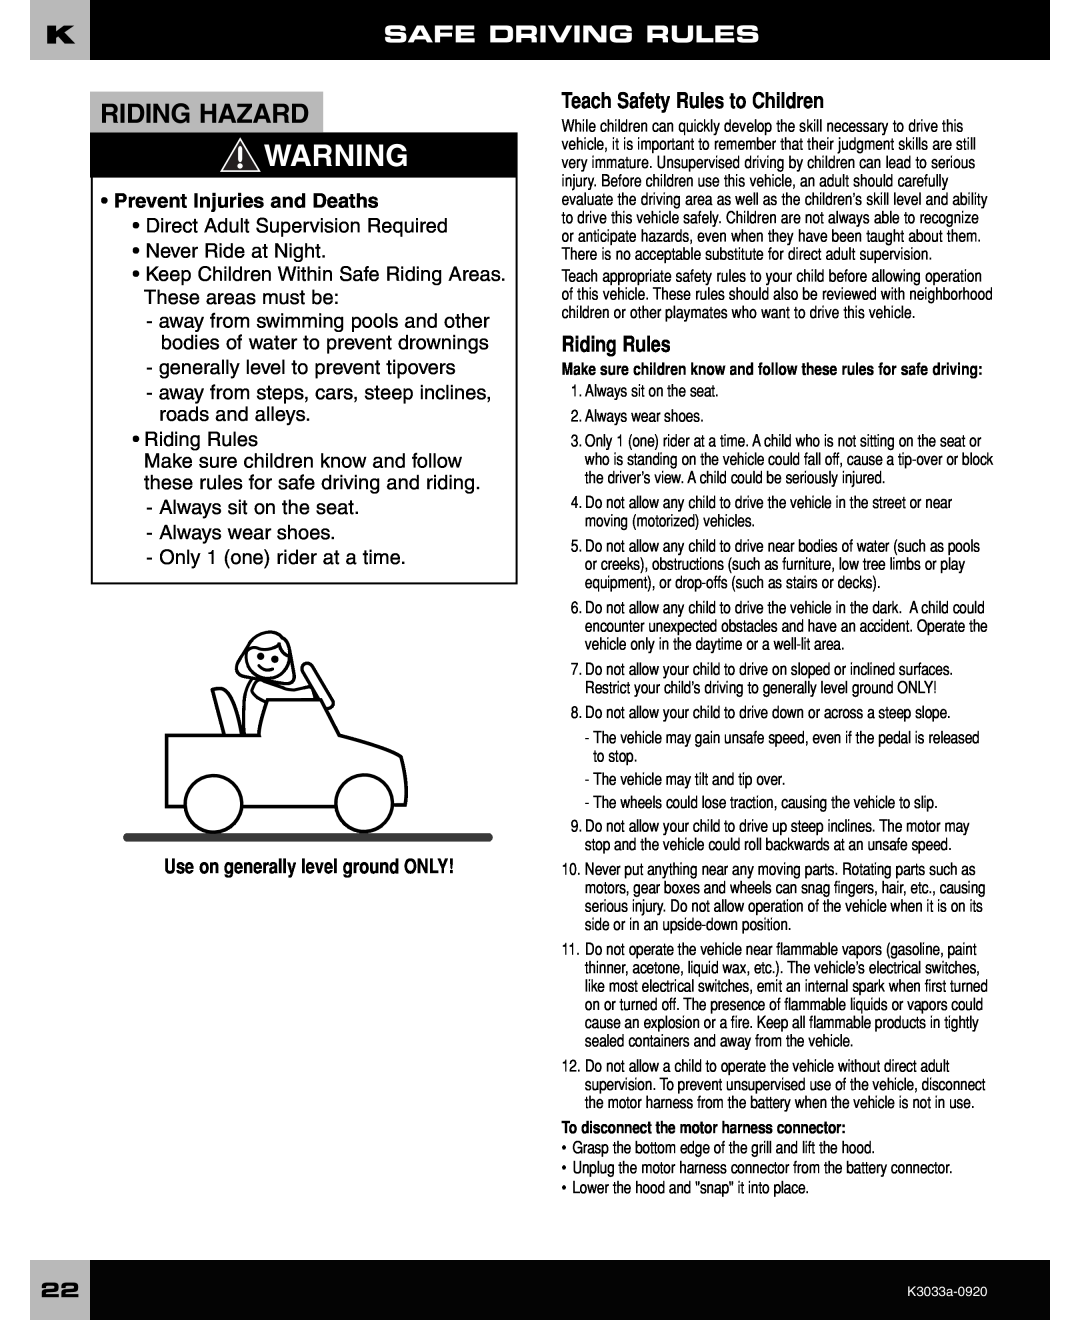 Ford F-150 Safe Driving Rules, Use on generally level ground ONLY, Riding Hazard, Teach Safety Rules to Children 